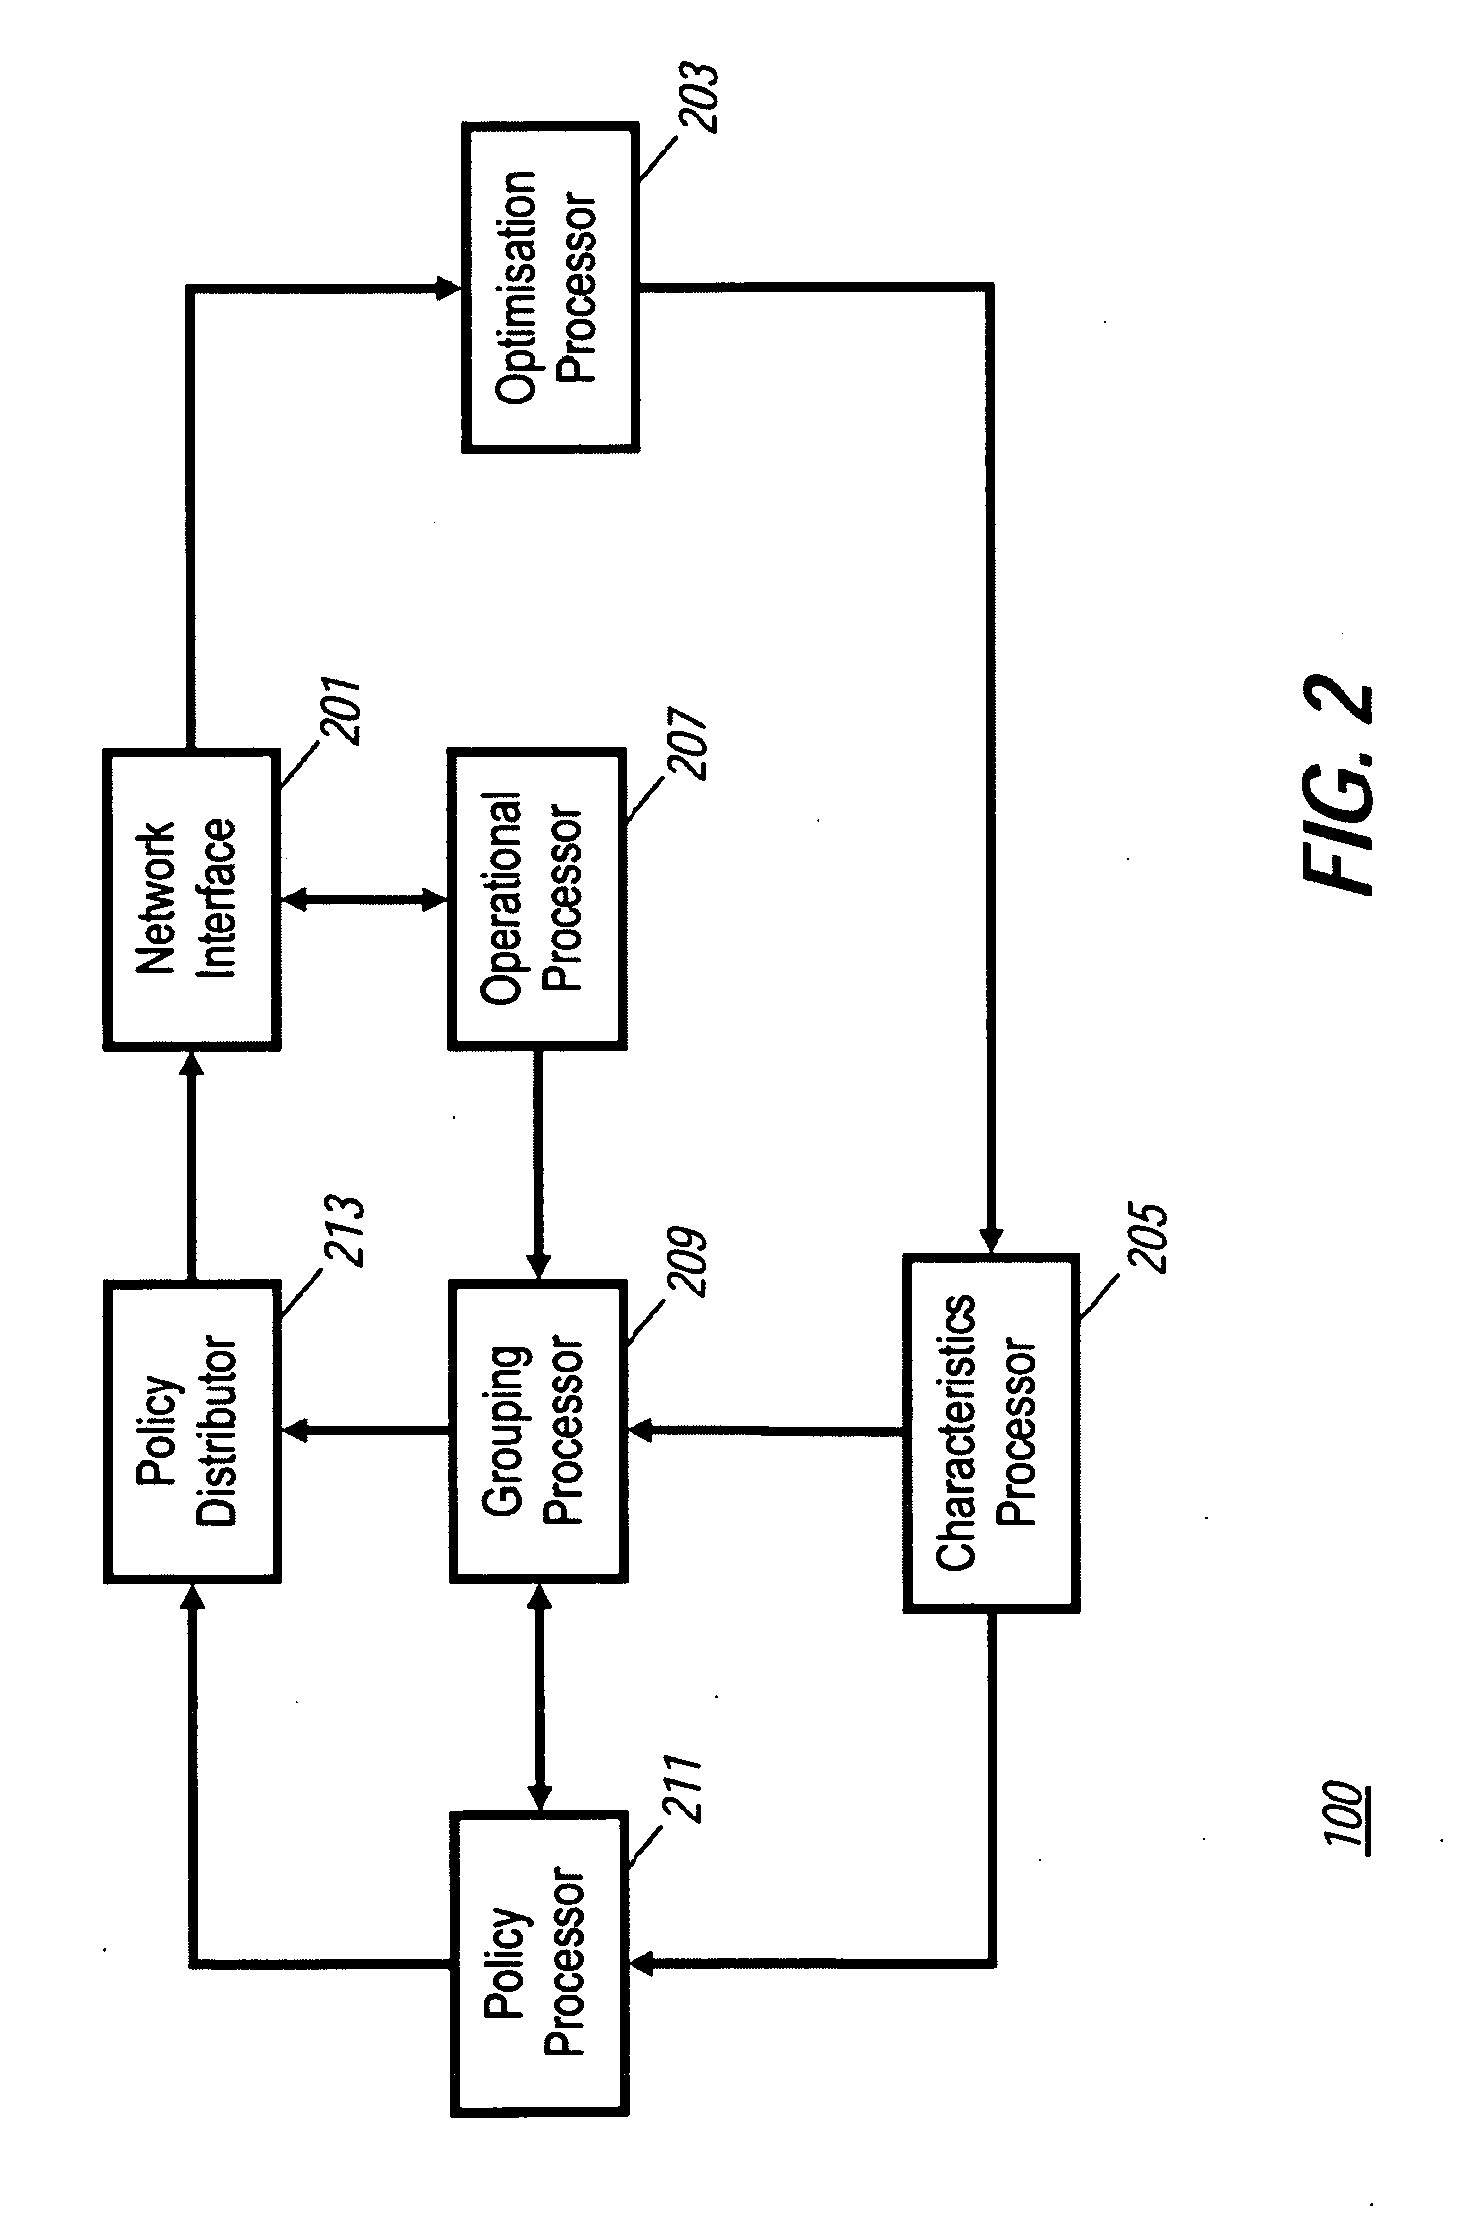 Optimization in a communication system